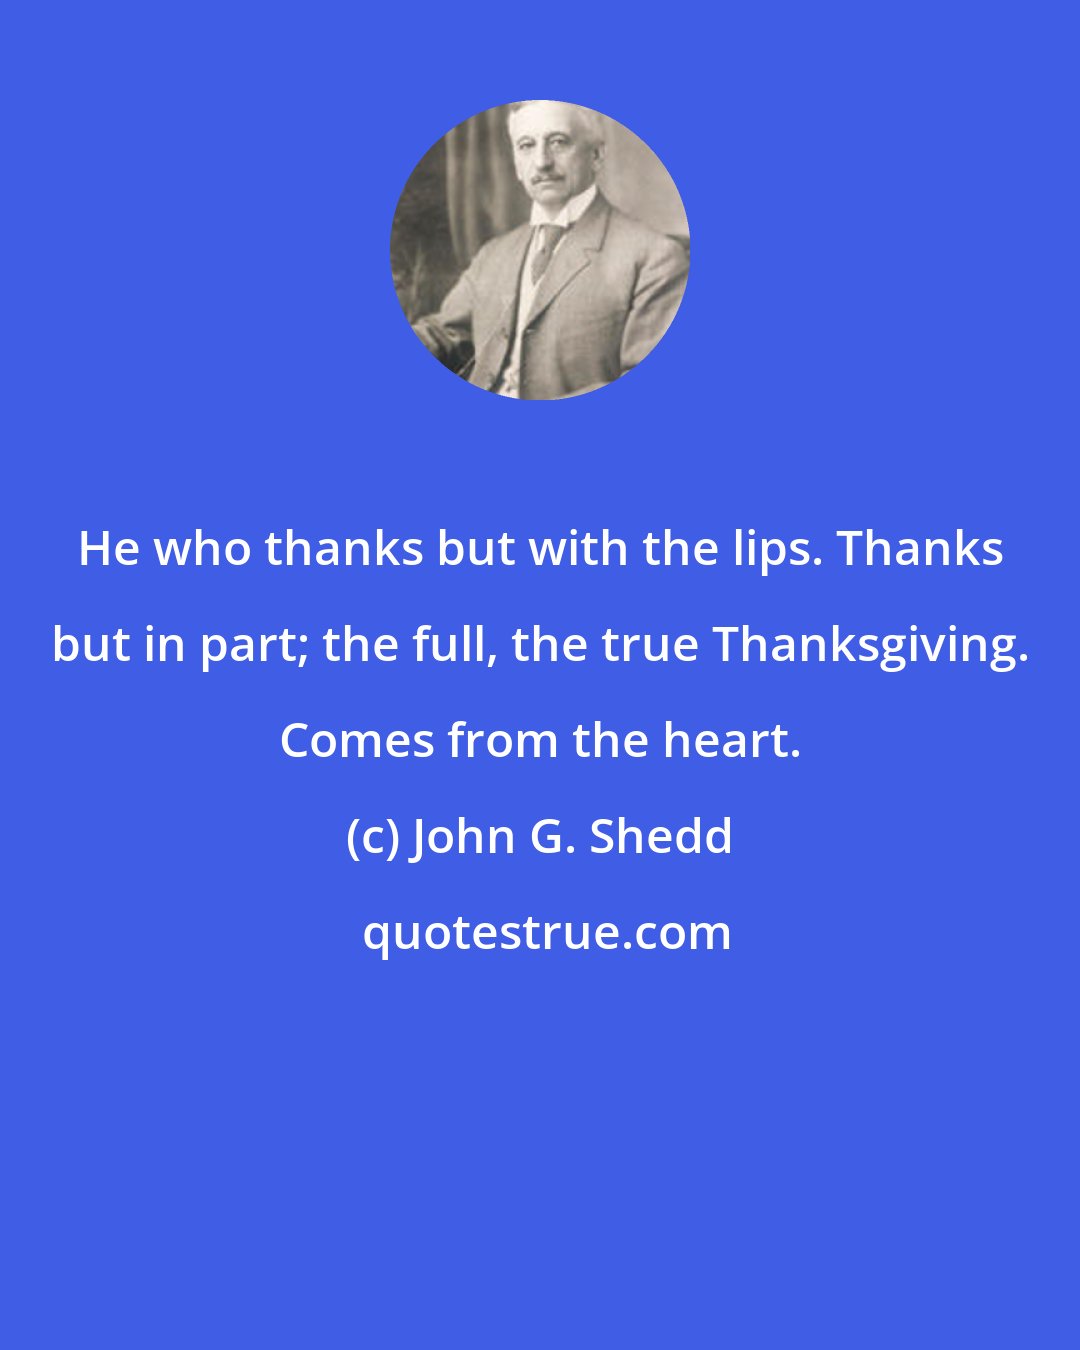 John G. Shedd: He who thanks but with the lips. Thanks but in part; the full, the true Thanksgiving. Comes from the heart.